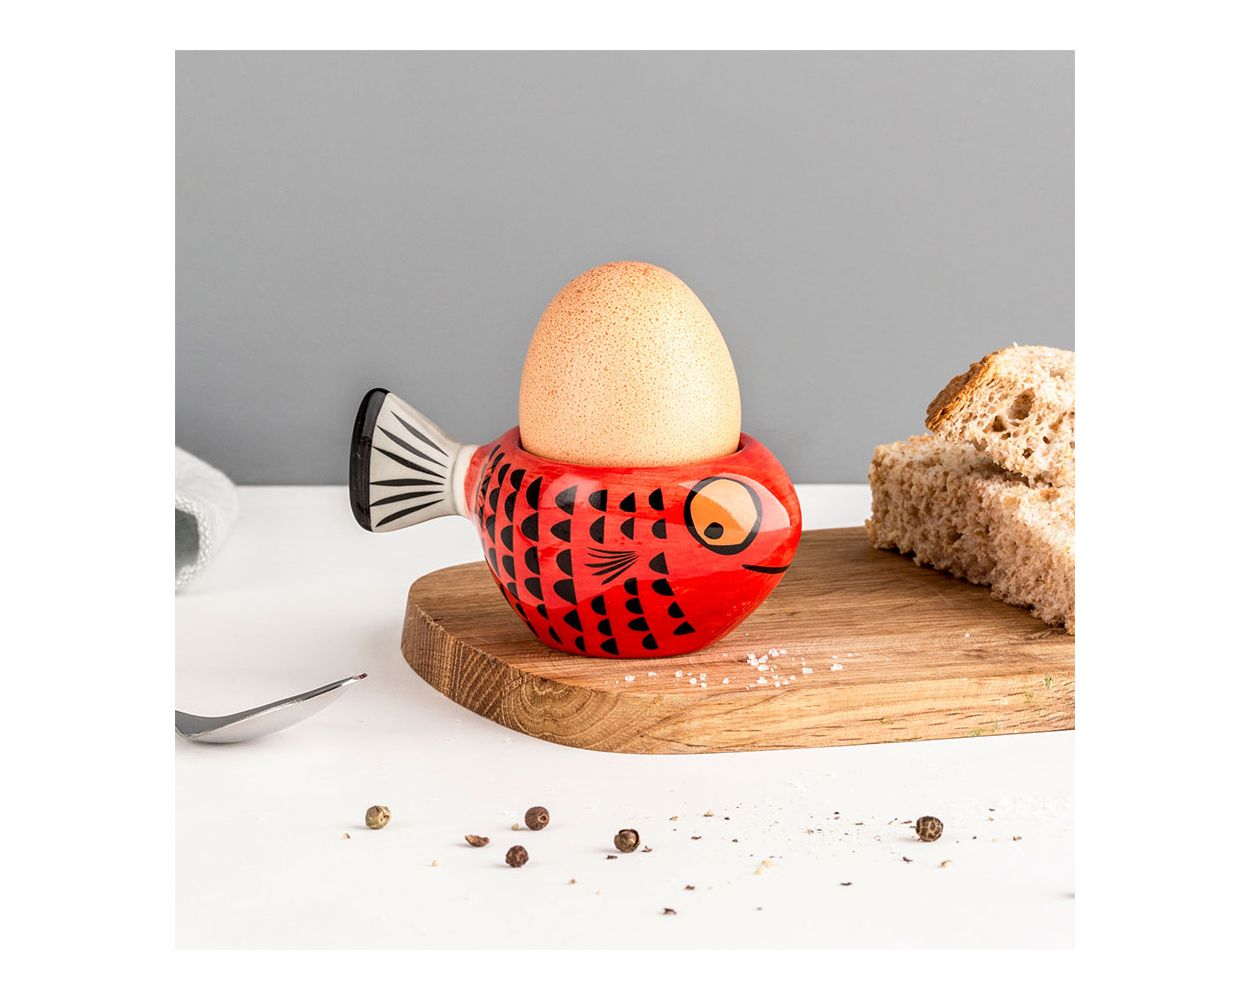 Harlequin Single Egg Cup Red – Keeping It Real collectables